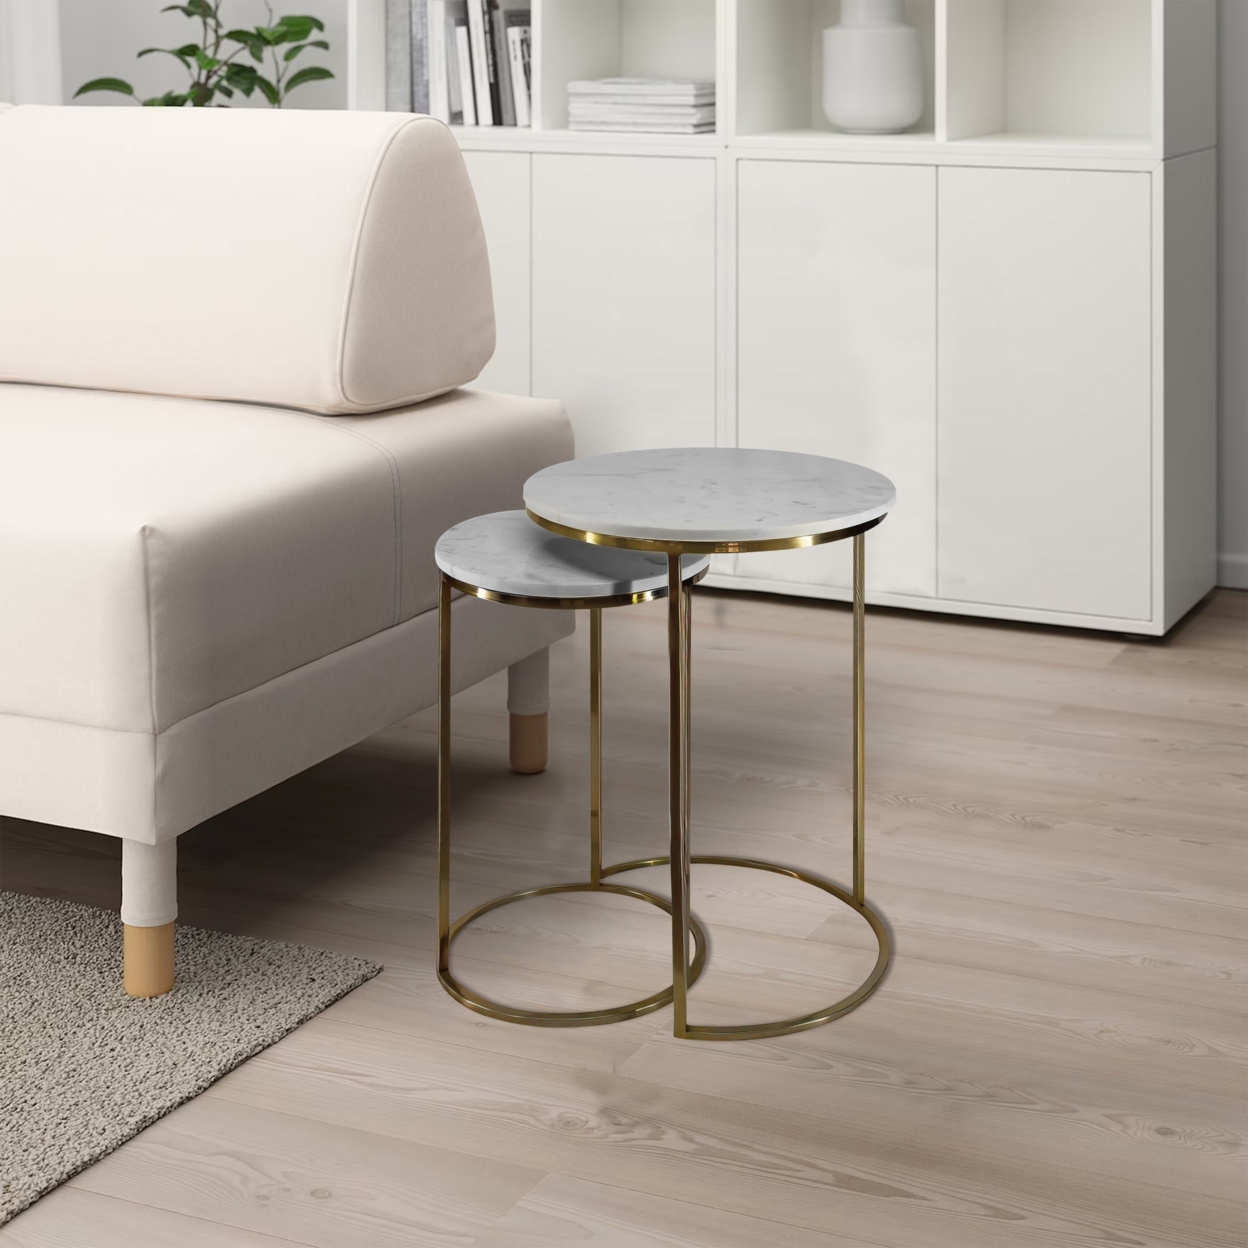 21, 18 Inch Transitional Style Round Marble Top Nesting End Table, Set Of 2, Metal Frame, White, Shiny Brass- Saltoro Sherpi